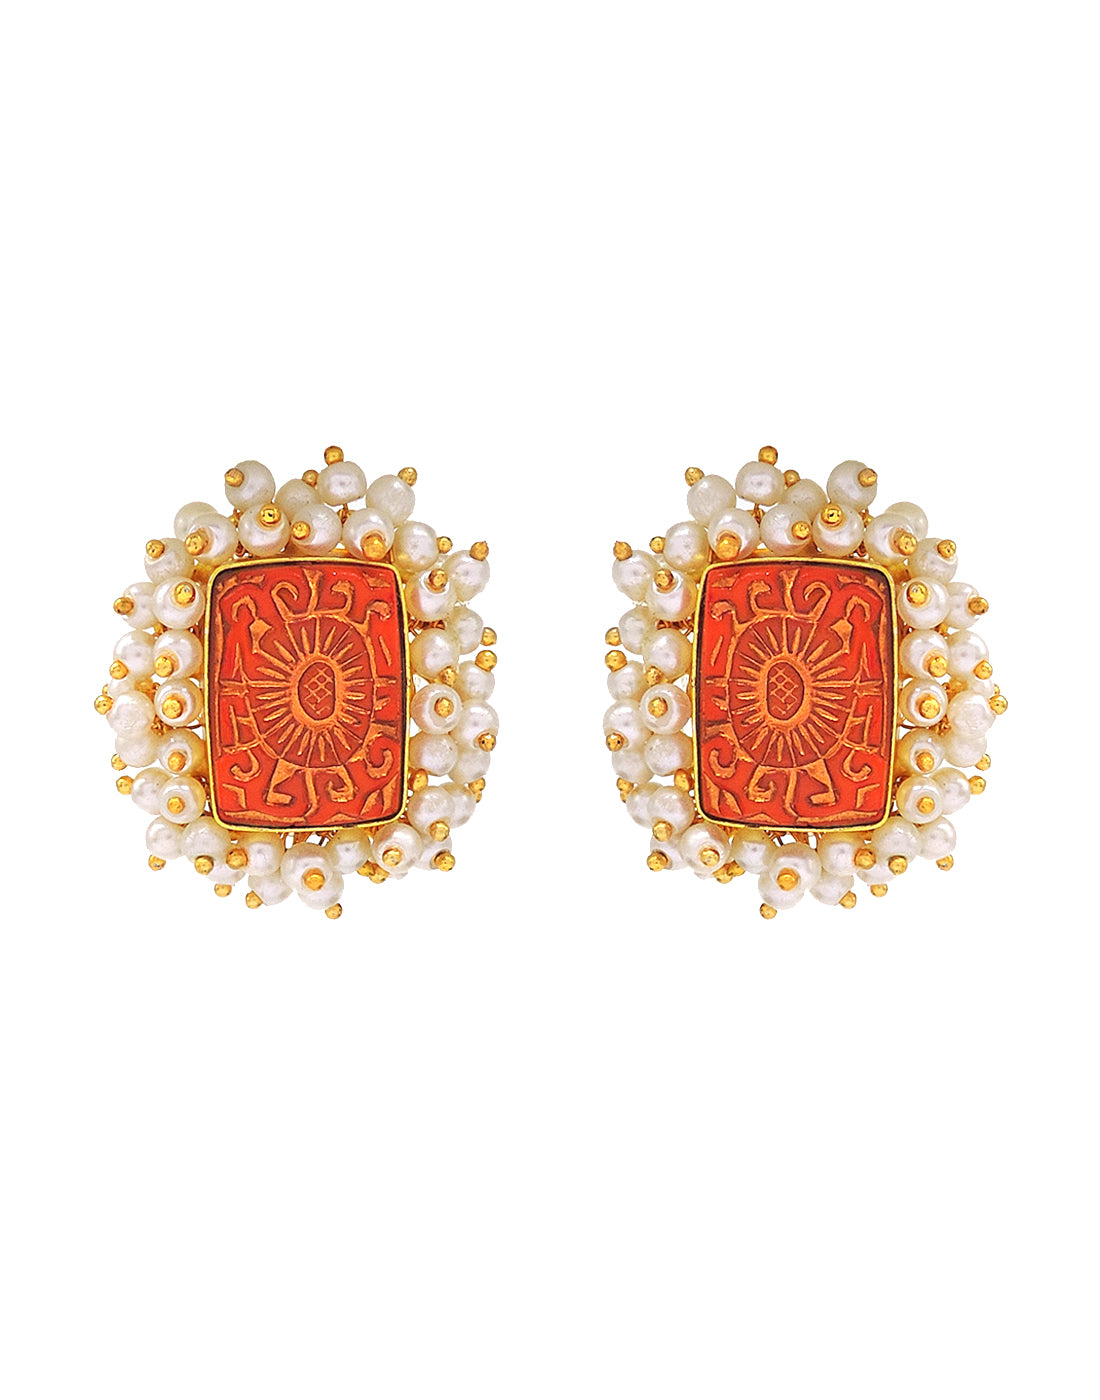 Bloom Rectangle Earrings | Orange, Red & Blue - Statement Earrings - Gold-Plated & Hypoallergenic - Made in India - Dubai Jewellery - Dori